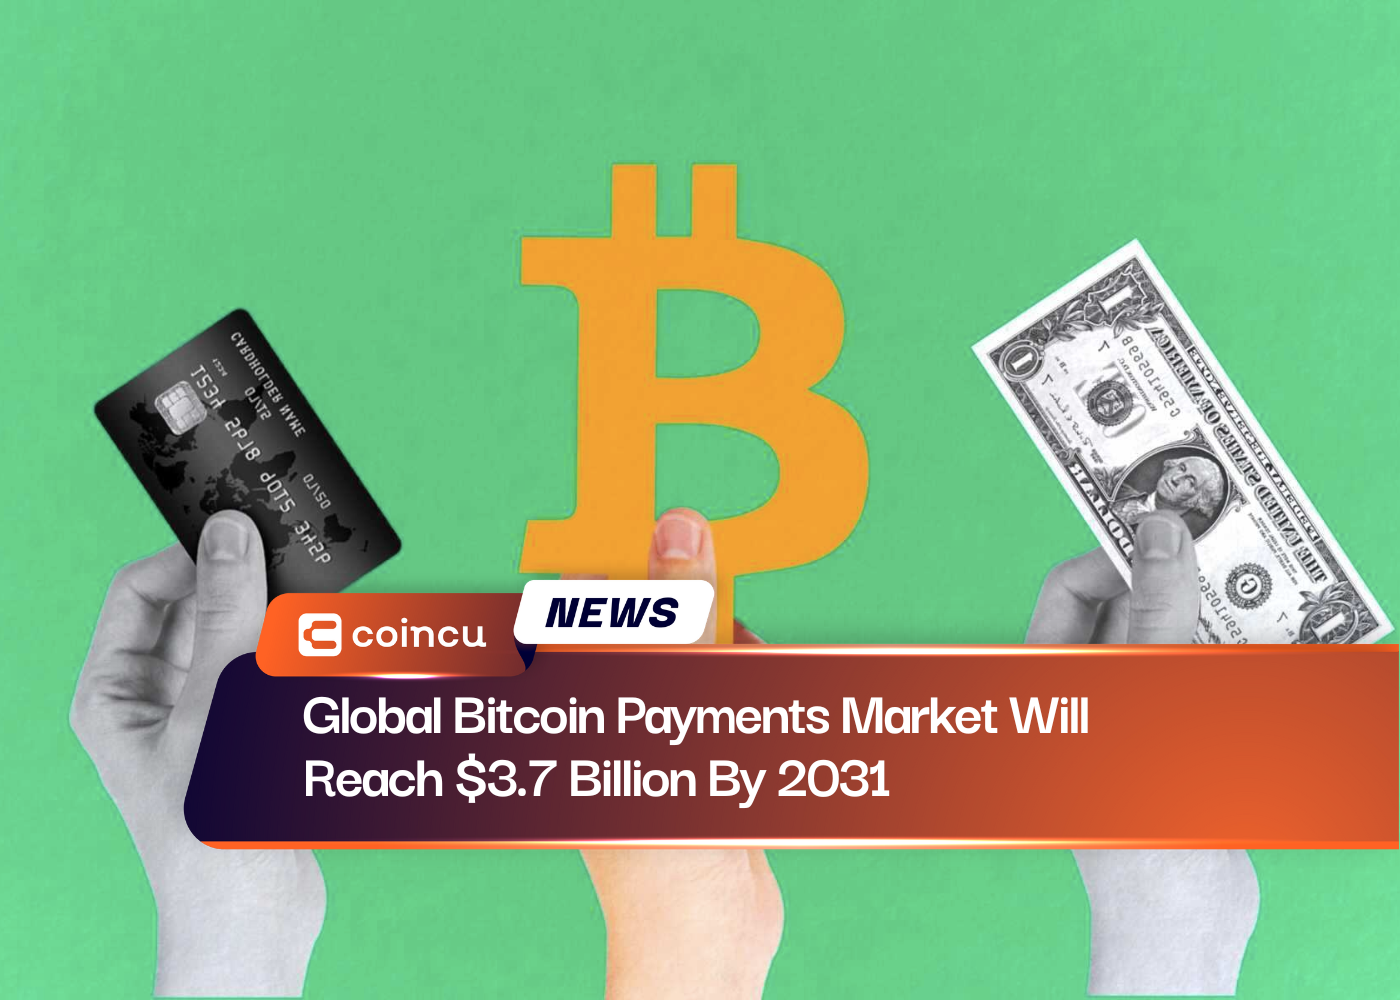 Global Bitcoin Payments Market Will Reach $3.7 Billion By 2031